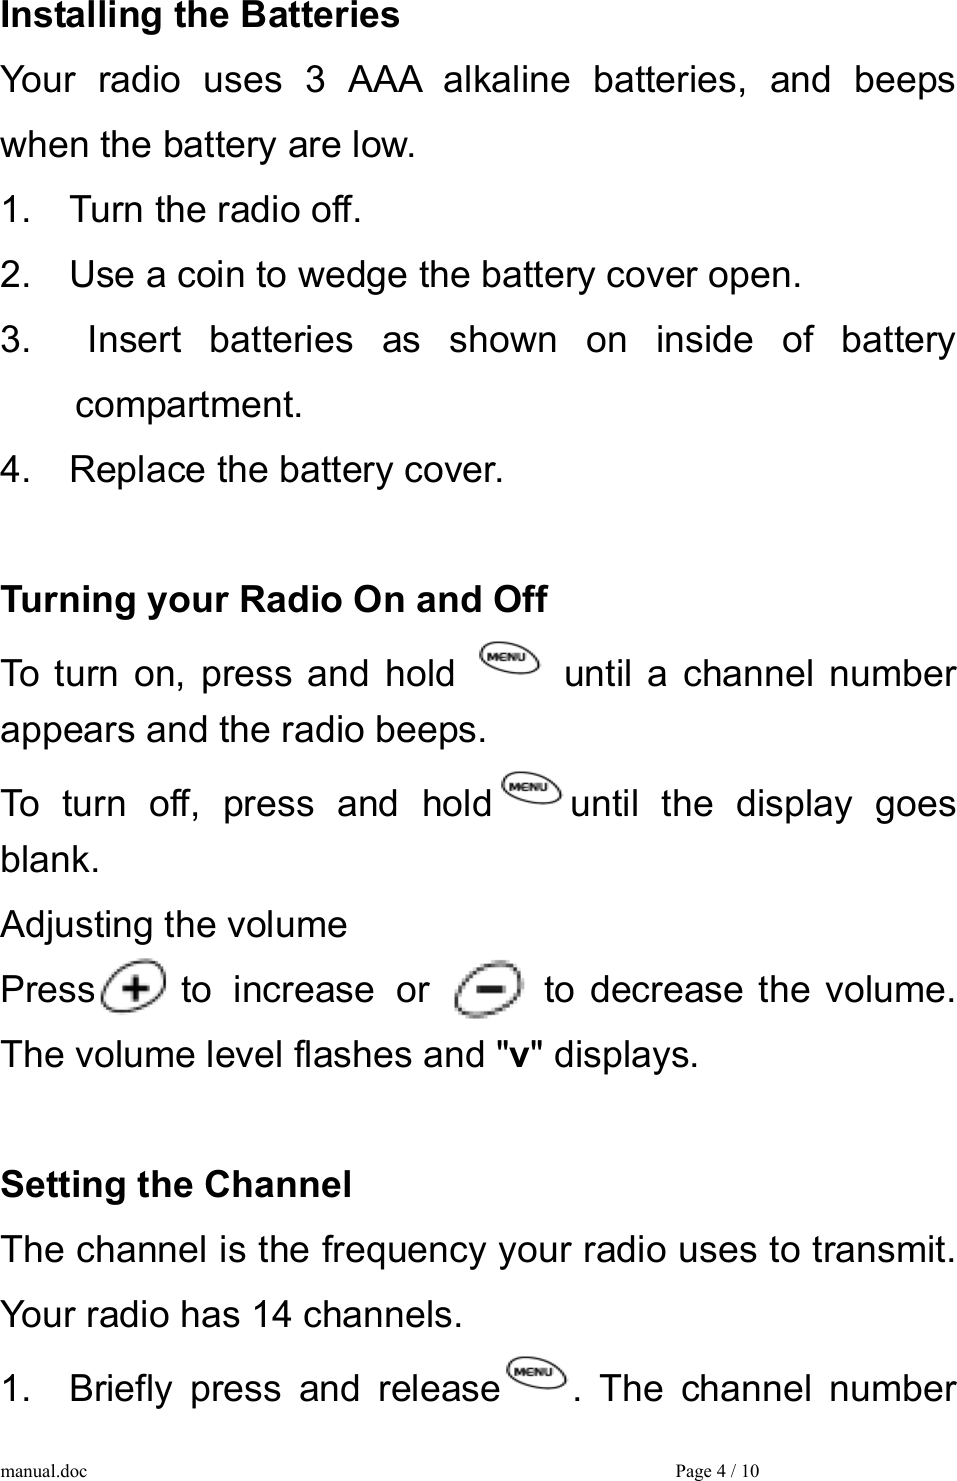 Installing the Batteries Your radio uses 3 AAA alkaline batteries, and beeps when the battery are low. 1.    Turn the radio off. 2.    Use a coin to wedge the battery cover open. 3.  Insert batteries as shown on inside of battery  compartment. 4.    Replace the battery cover.  Turning your Radio On and Off To turn on, press and hold   until a channel number appears and the radio beeps. To turn off, press and hold until the display goes blank. Adjusting the volume Press    to increase or   to decrease the volume. The volume level flashes and &quot;v&quot; displays.  Setting the Channel The channel is the frequency your radio uses to transmit. Your radio has 14 channels. 1.  Briefly press and release . The channel number manual.doc    Page 4 / 10 